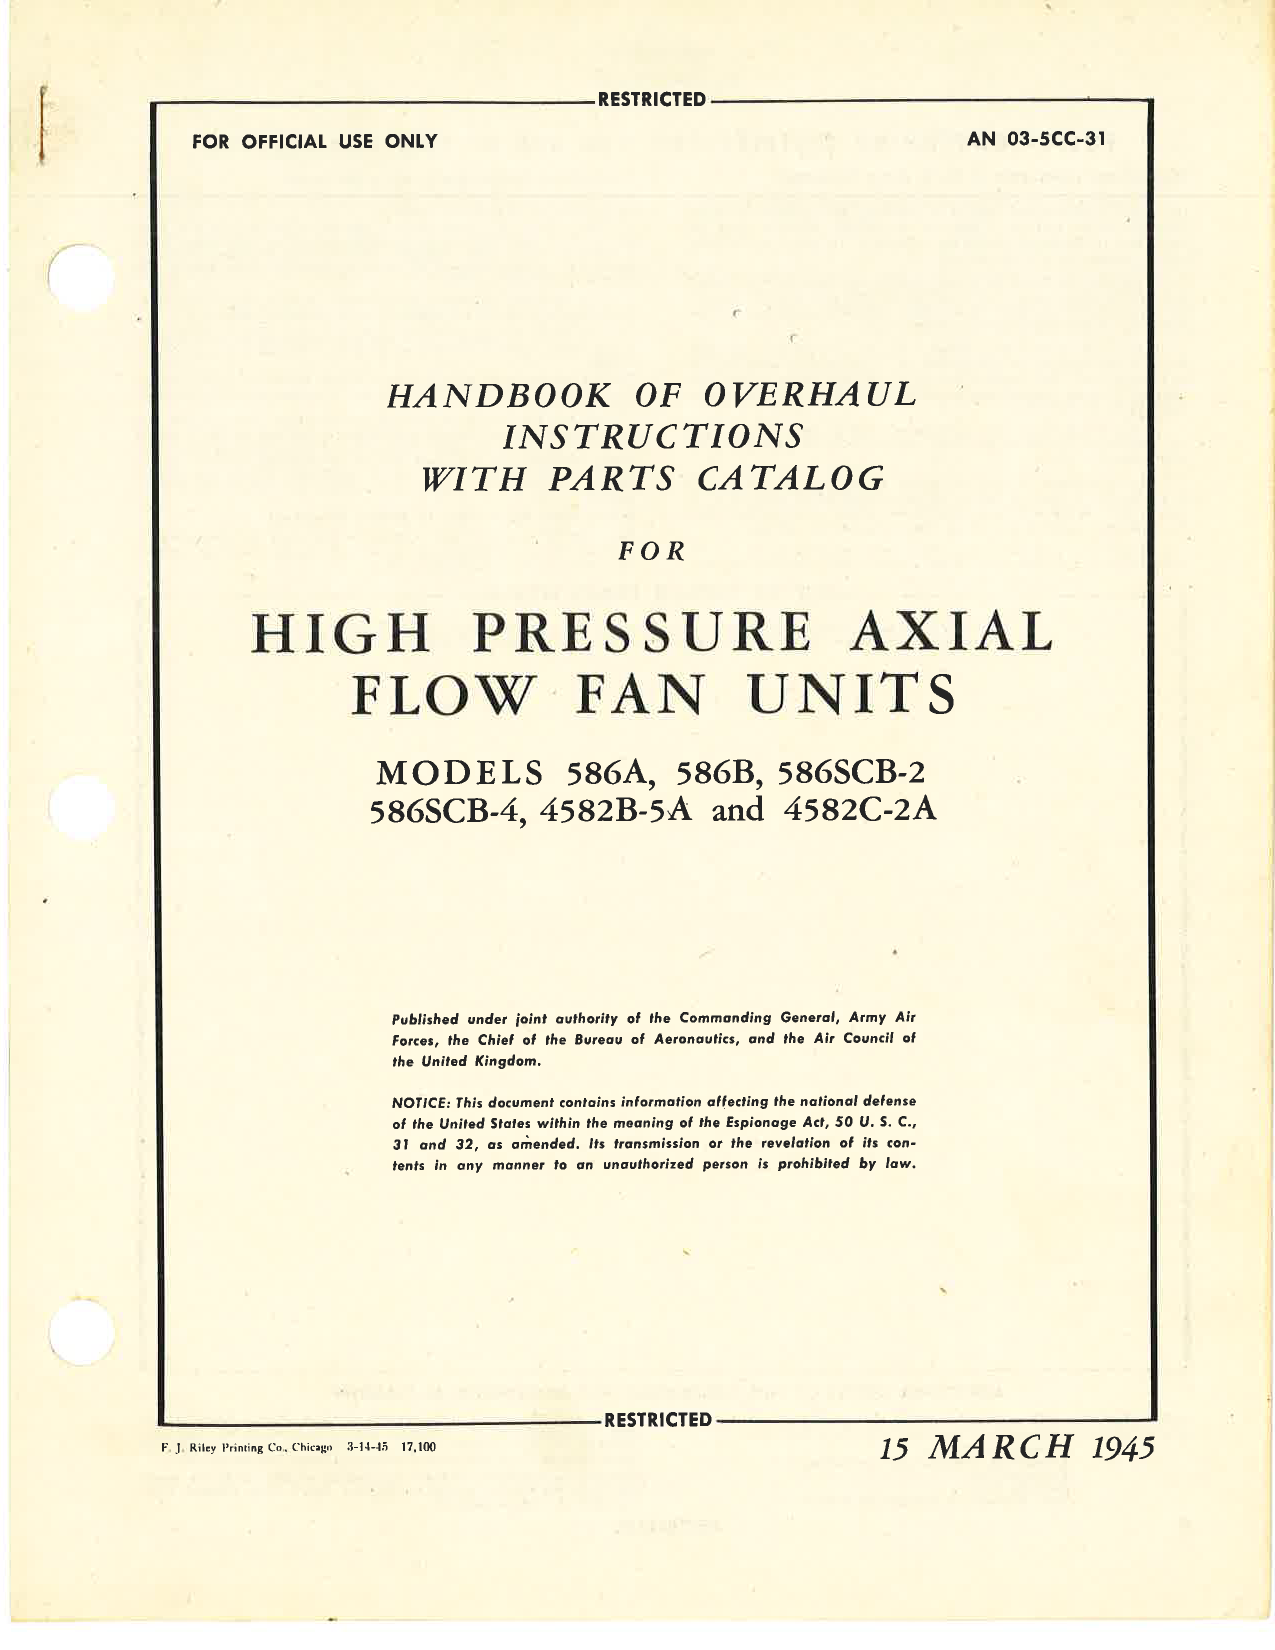 Sample page 1 from AirCorps Library document: Overhaul Instructions with Parts Catalog for High Pressure Axial Flow Fan Units